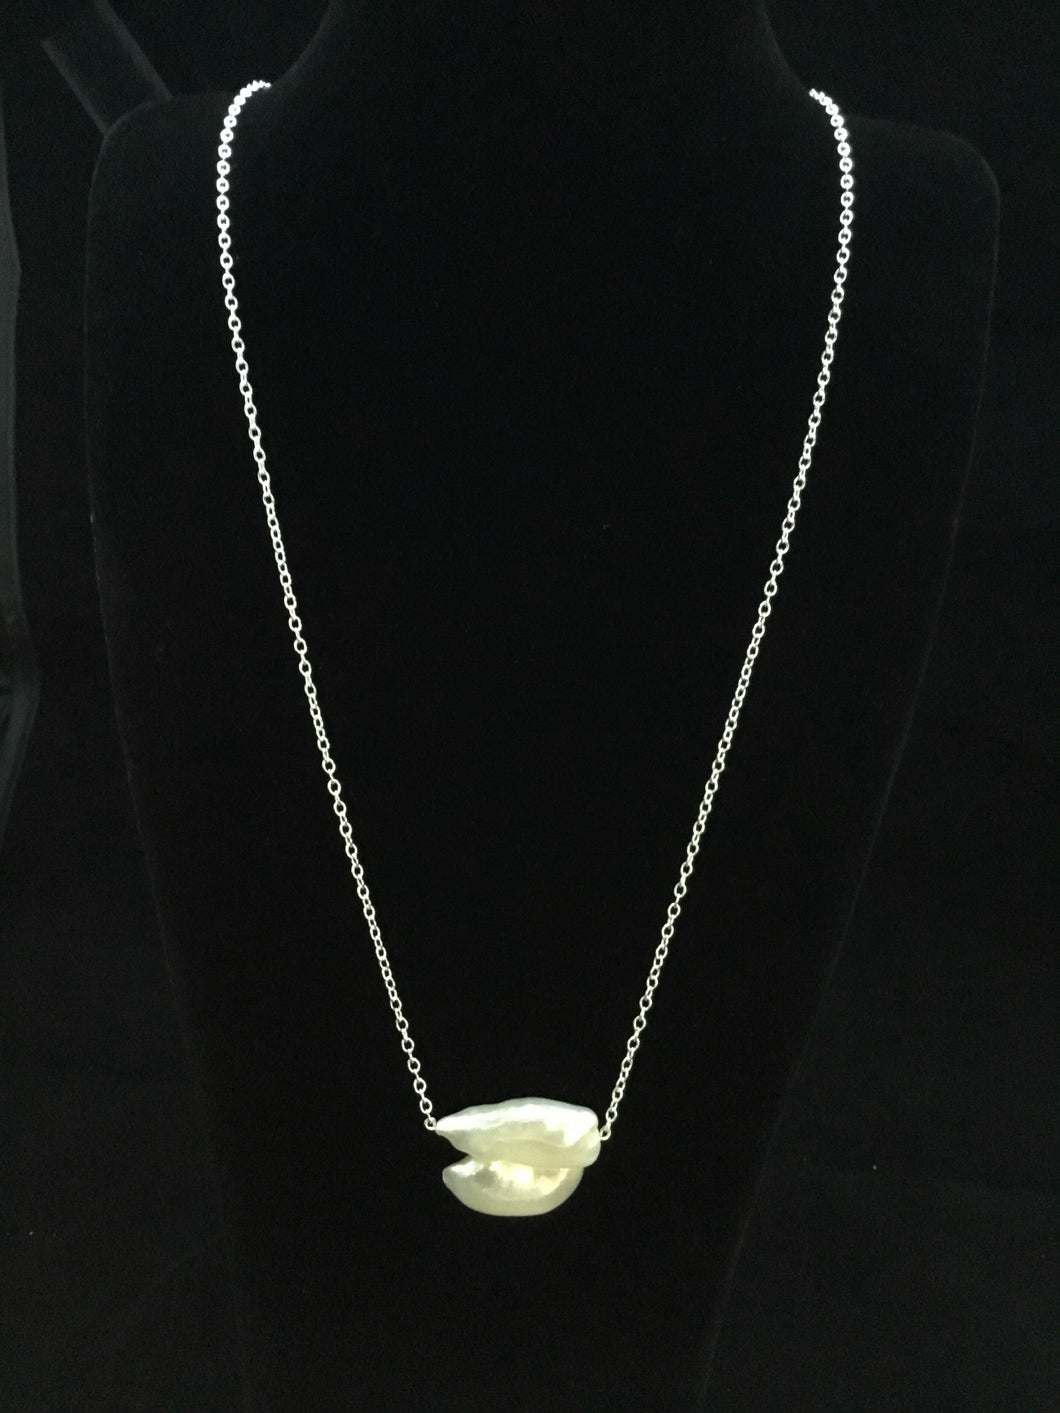 UNIQUE FRESHWATER PEARL NECKLACE